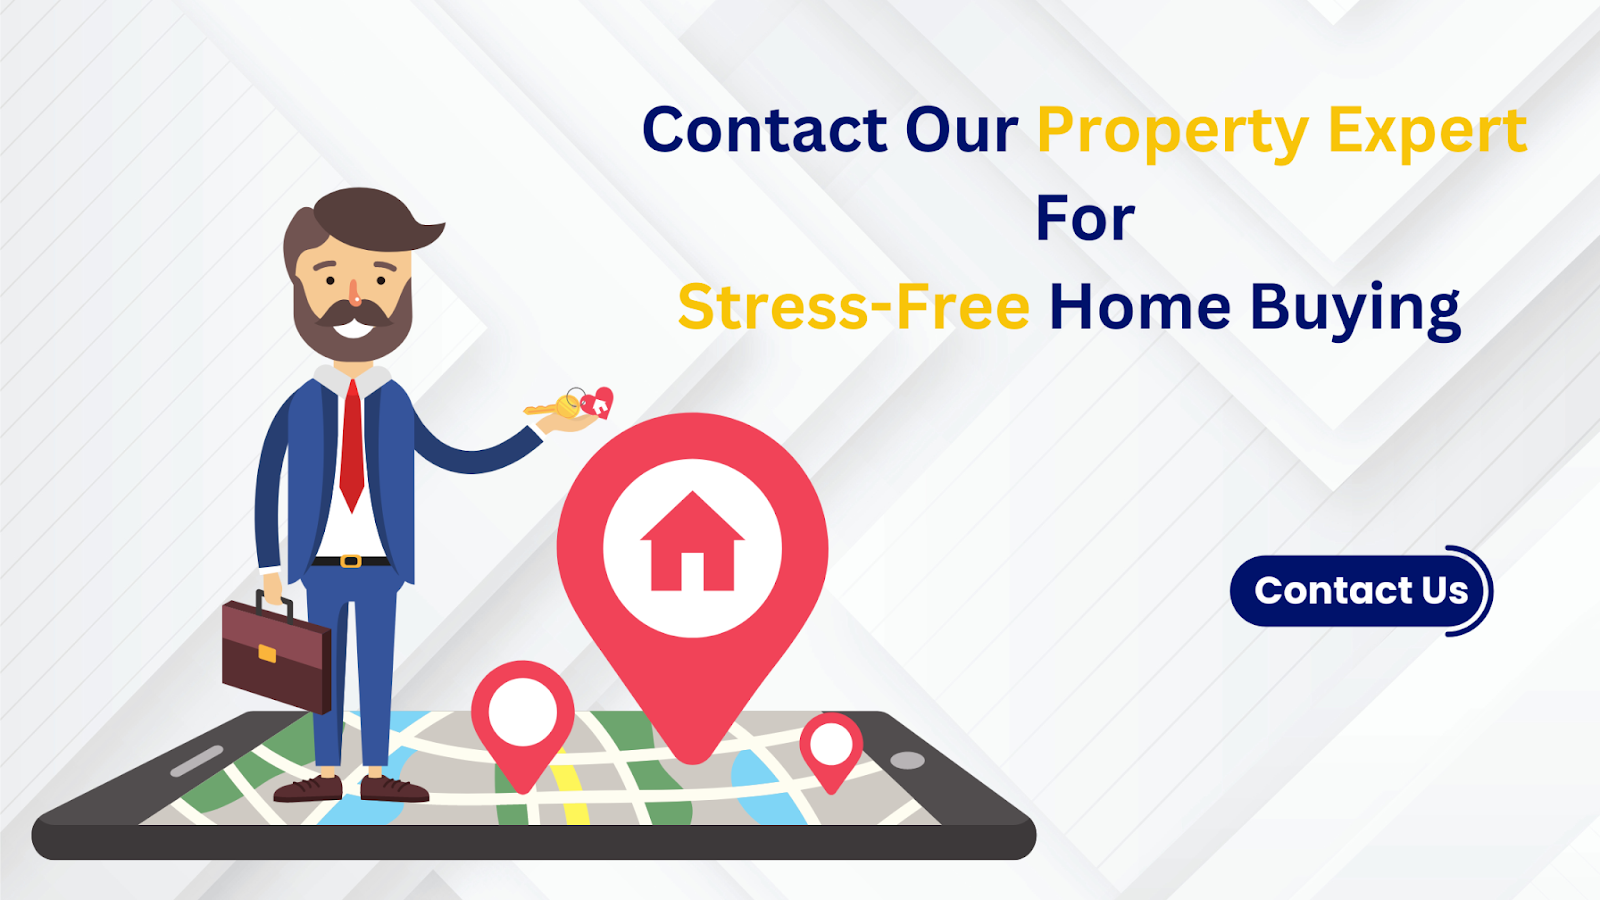 Contact our property experts for stress-free home buying